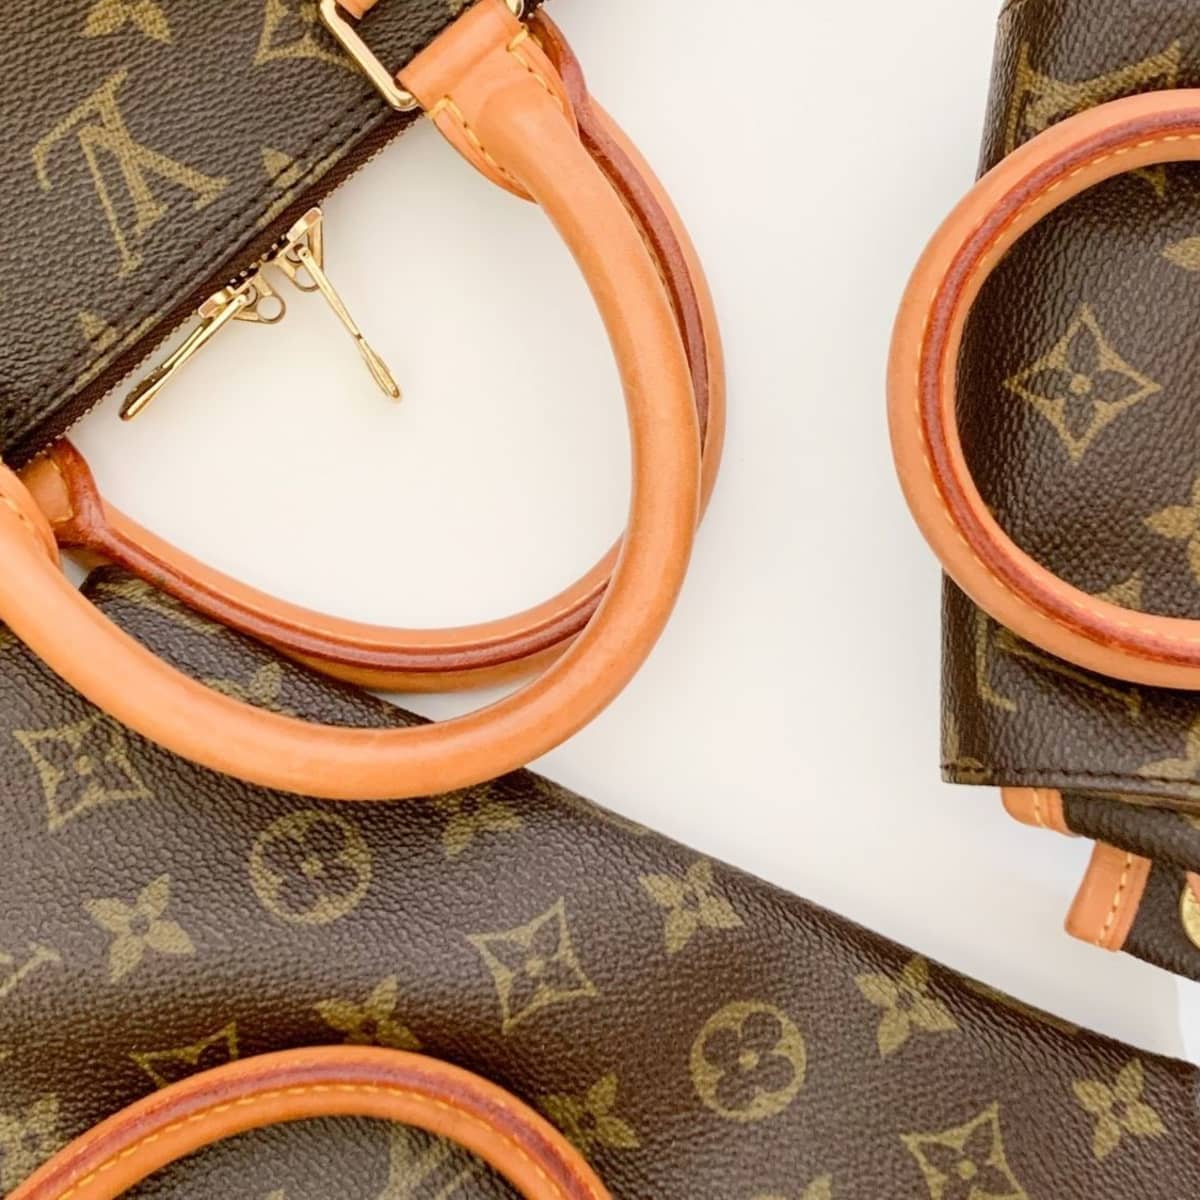 coach bags totes purses how to tell if a coach purse is real or fake